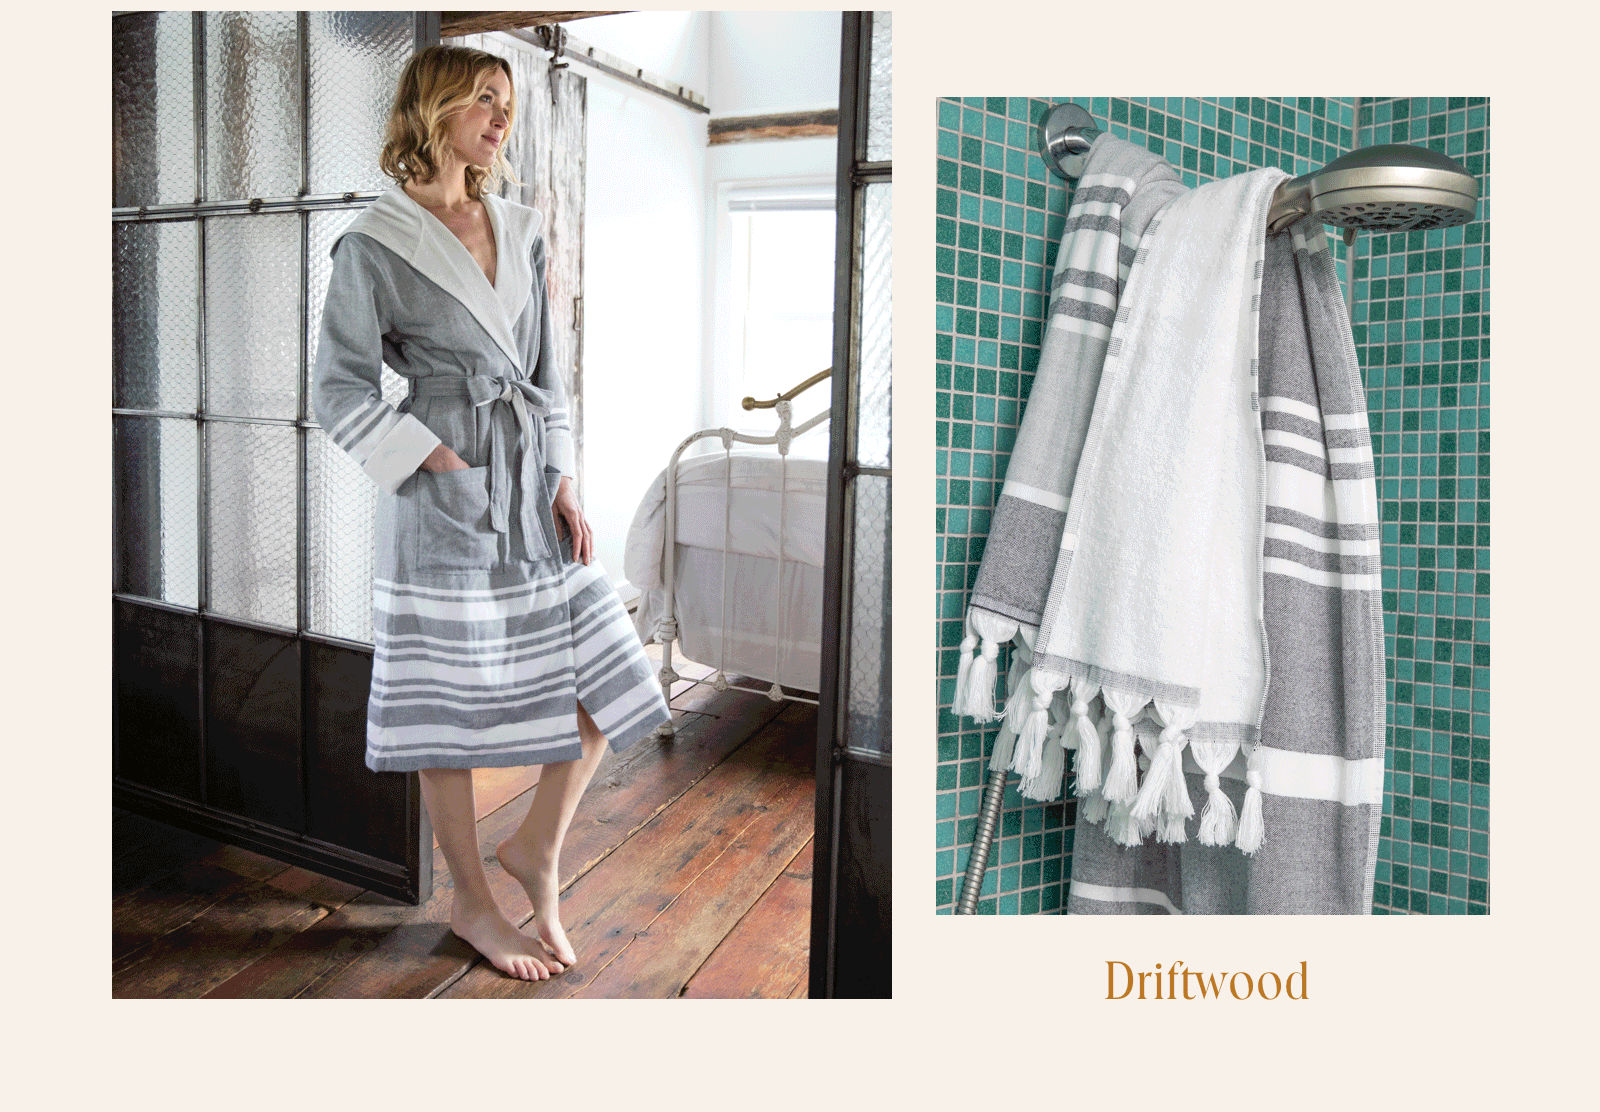 Shop our new hammam towels, robes, and beach blankets!